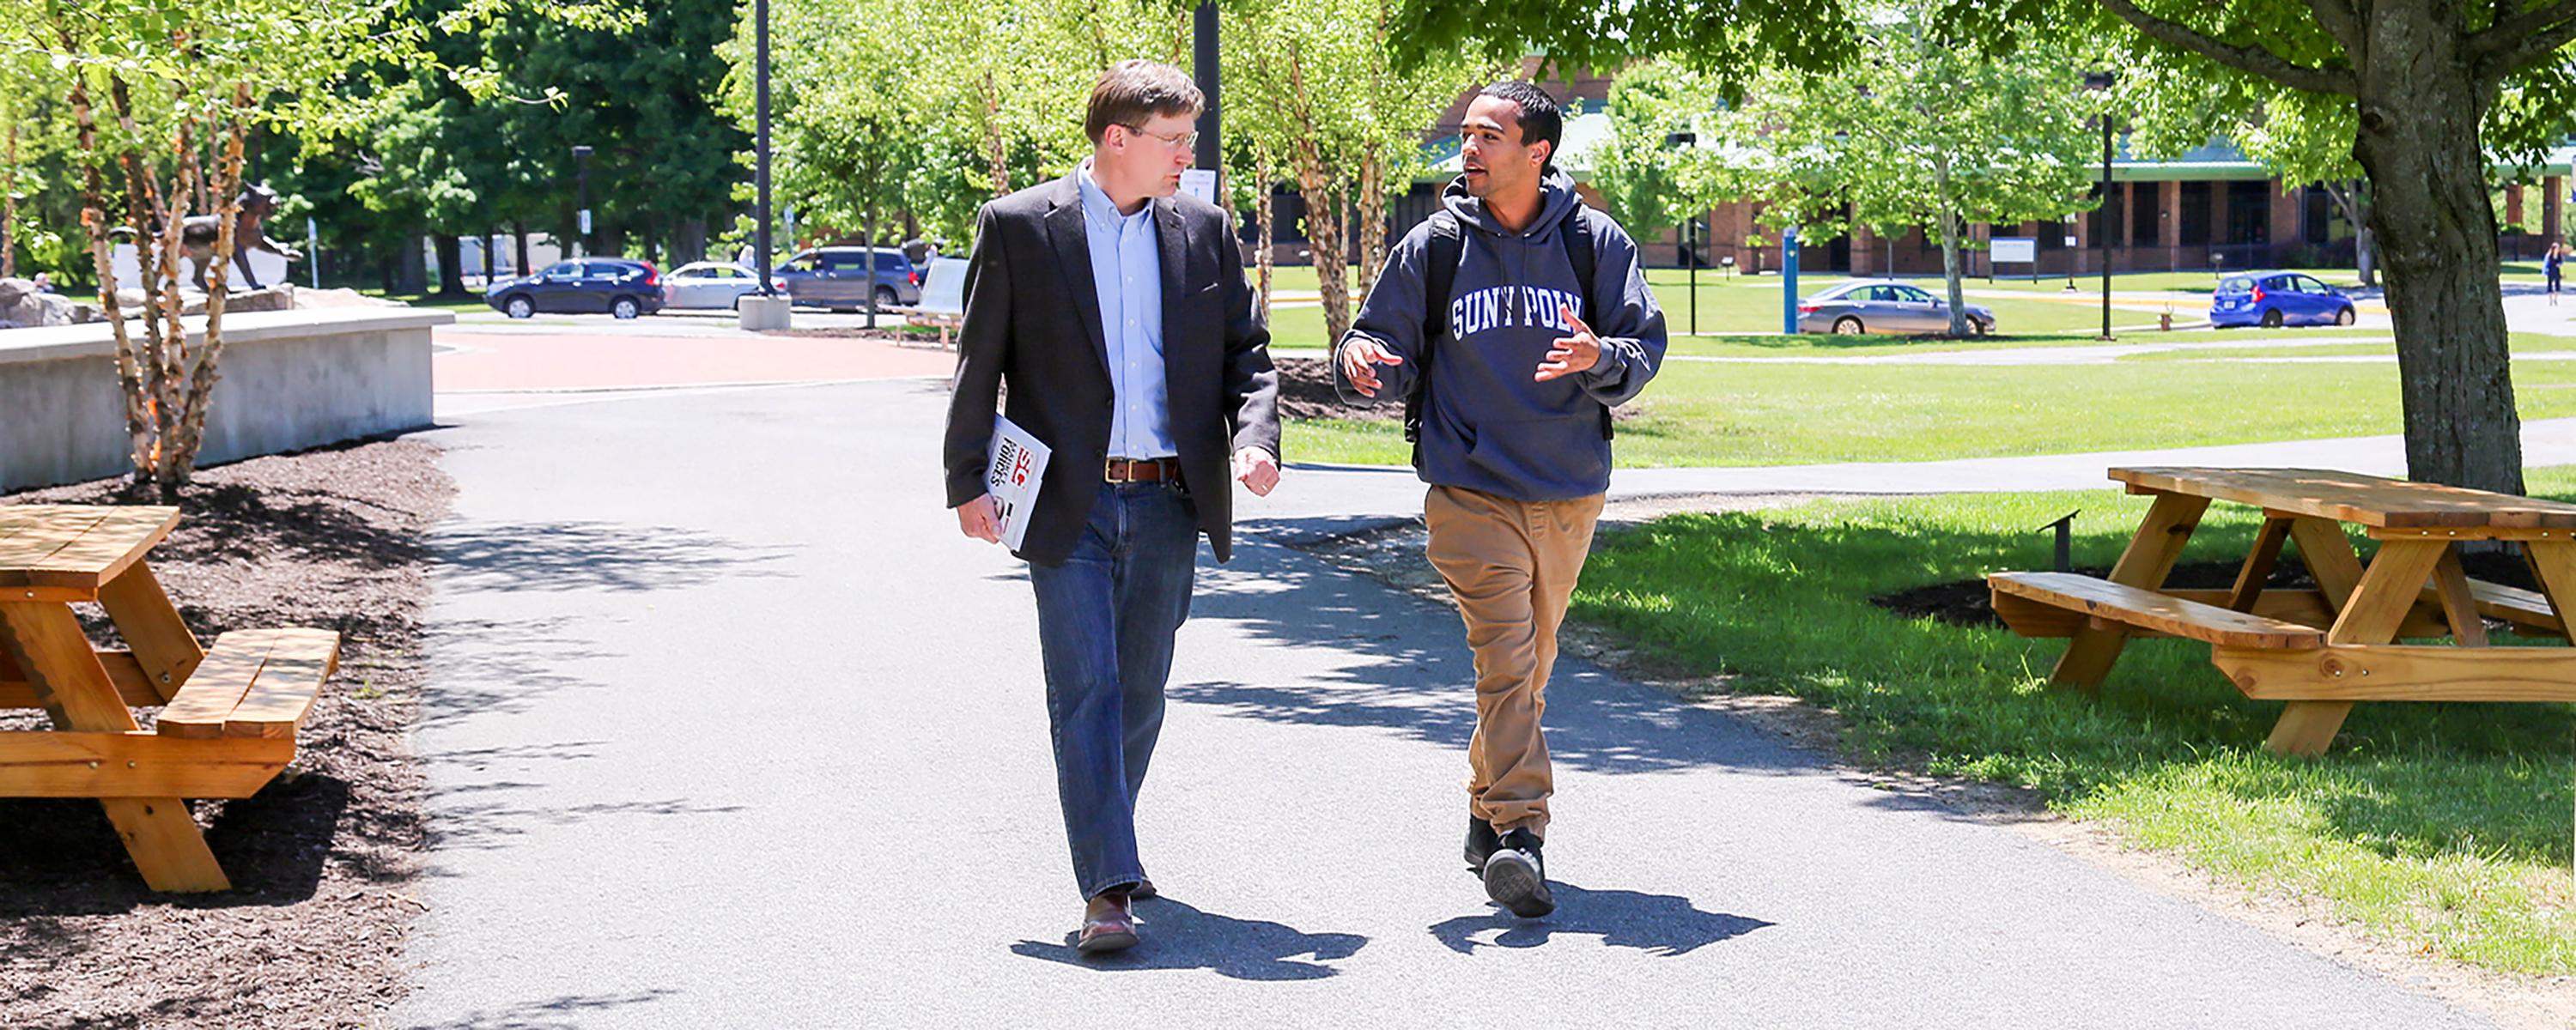 student and professor walking on campus image